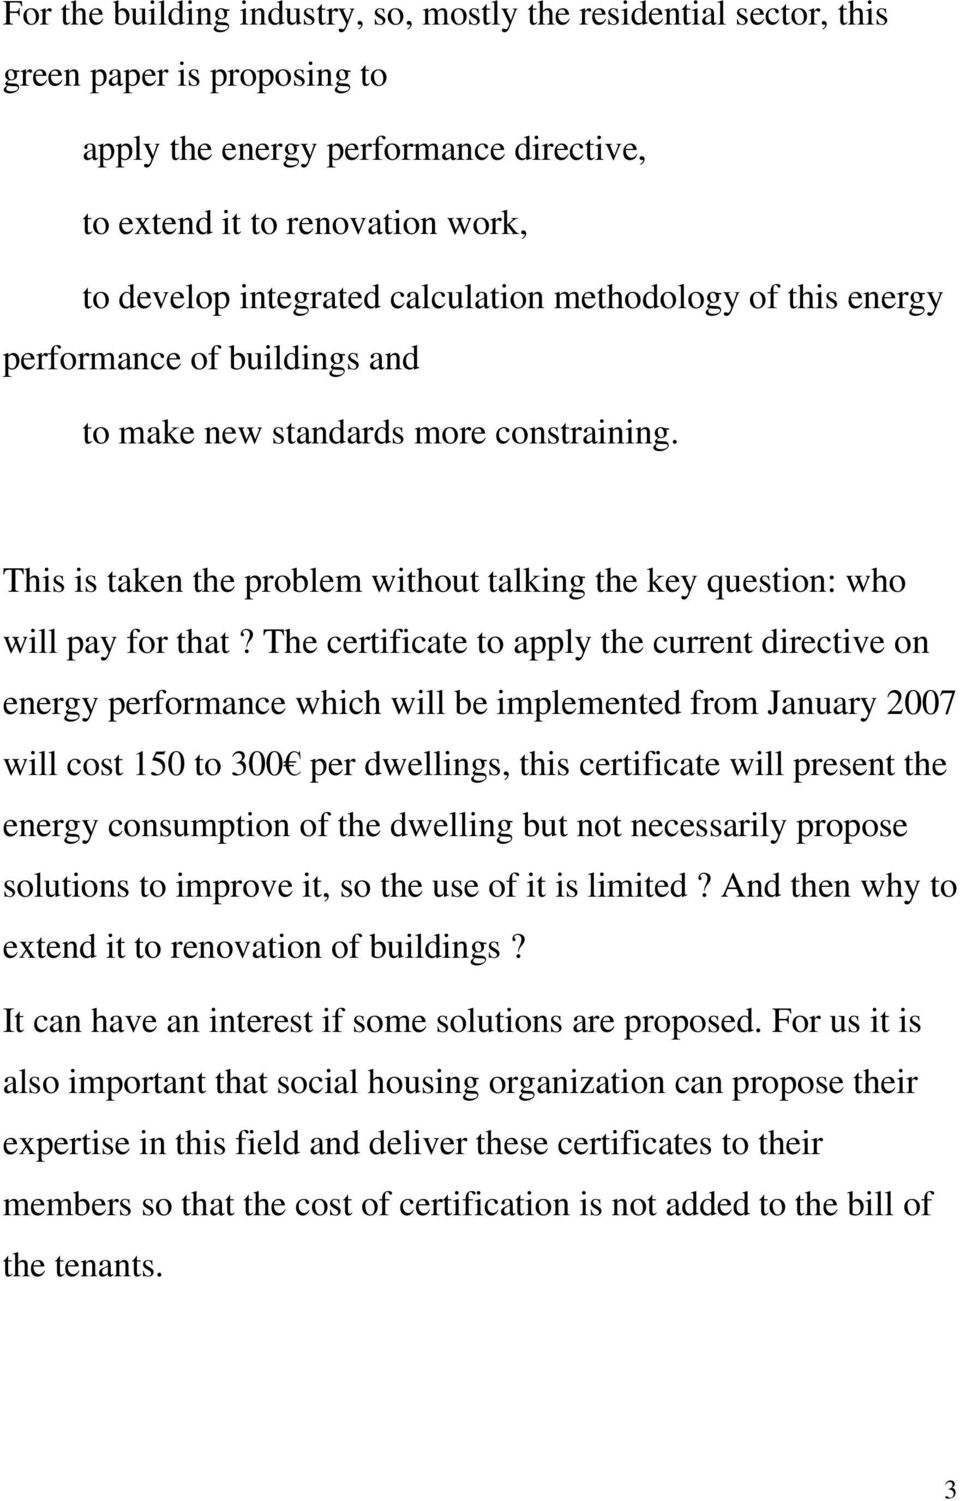 The certificate to apply the current directive on energy performance which will be implemented from January 2007 will cost 150 to 300 per dwellings, this certificate will present the energy